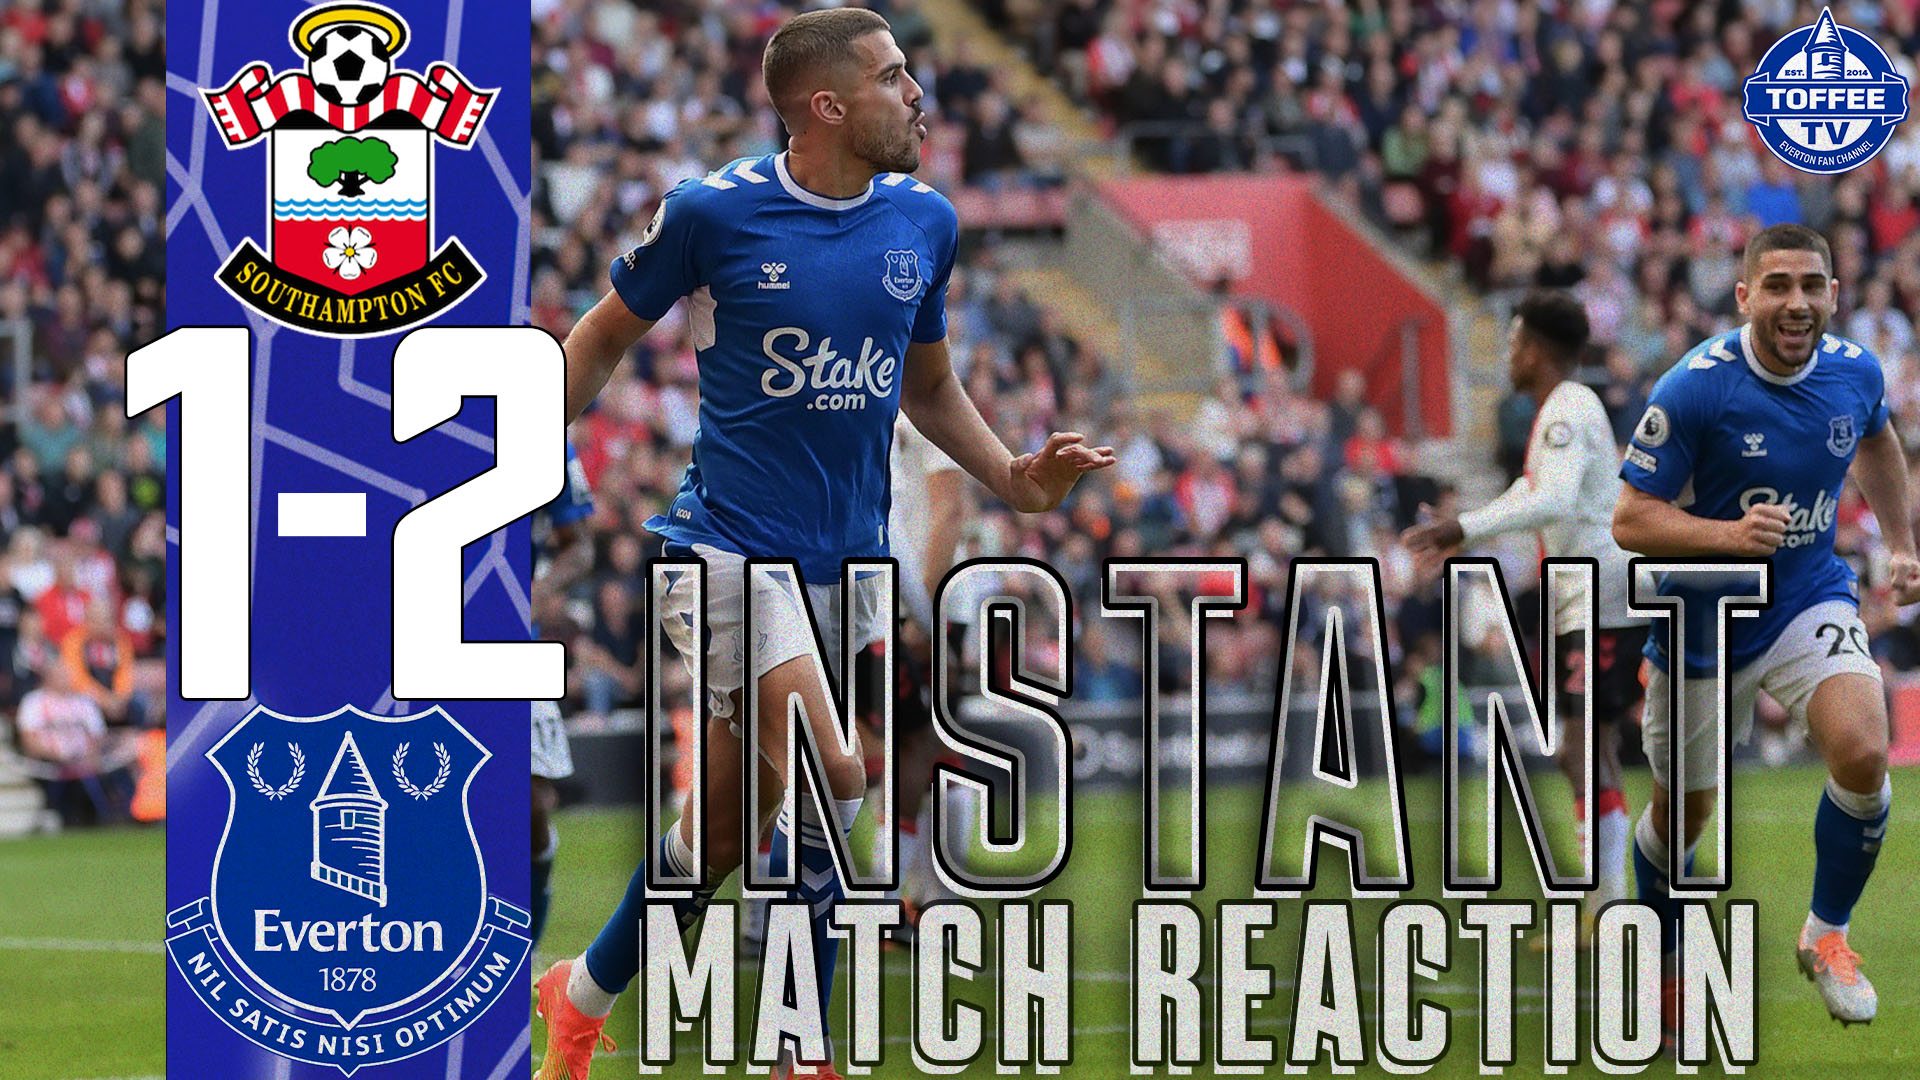 Featured image for “Southampton 1-2 Everton | Match Reaction”